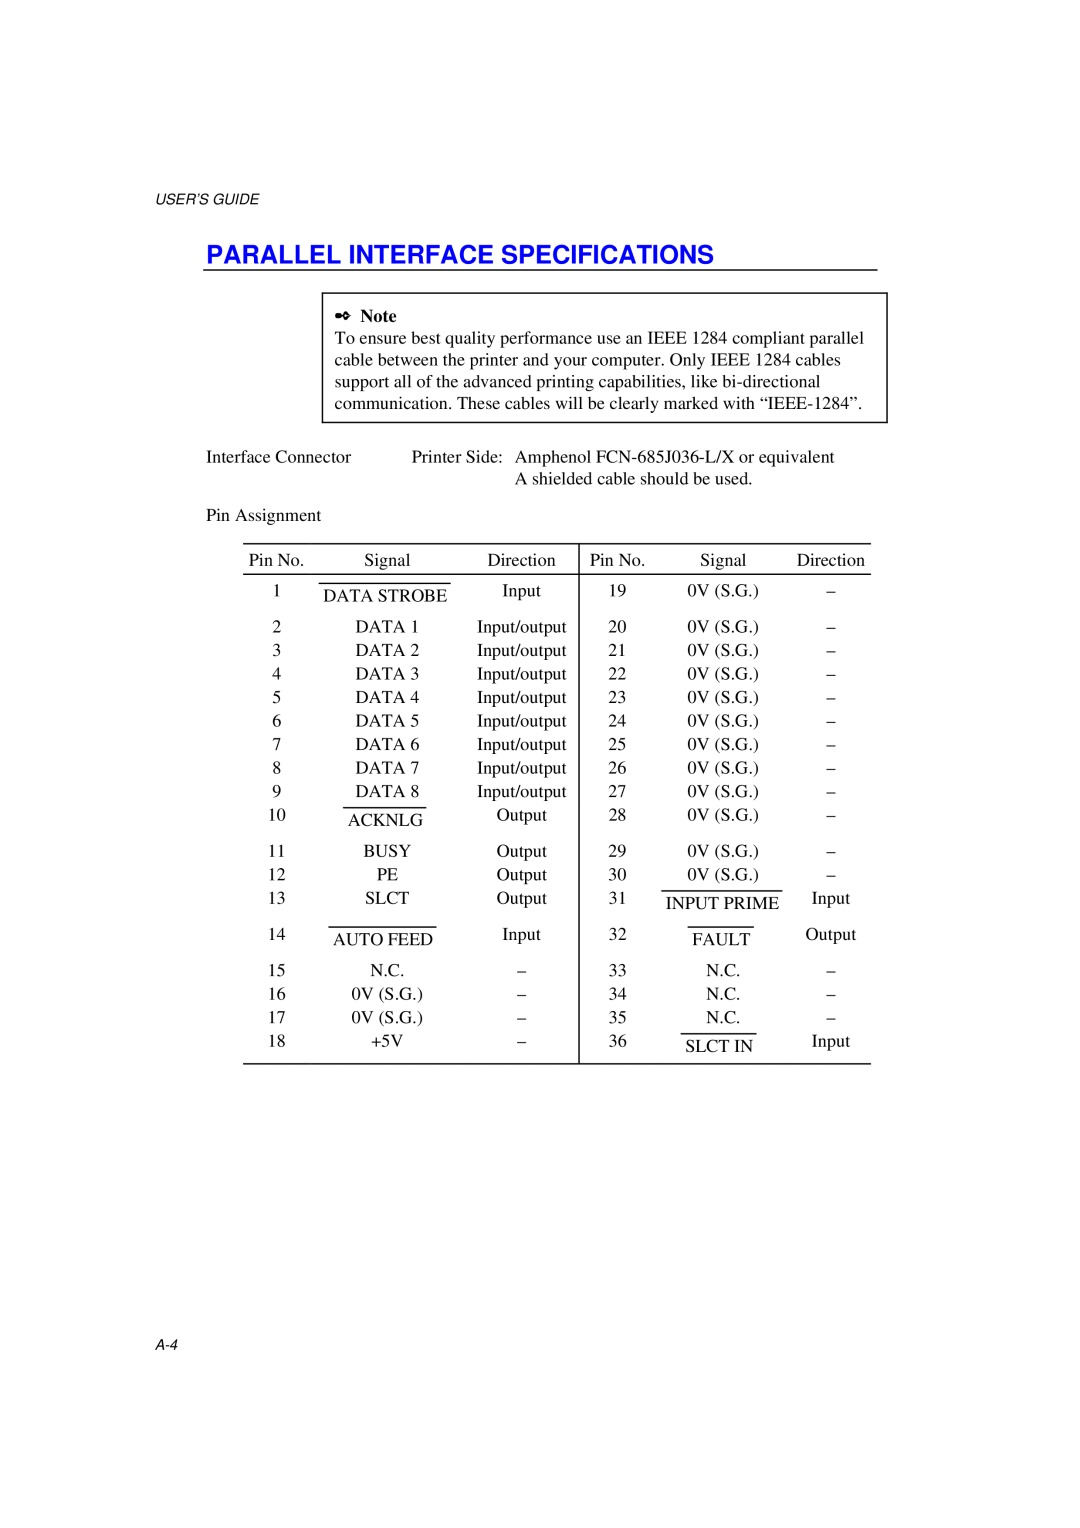 Brother MFC/HL-P2000 manual Parallel Interface Specifications 